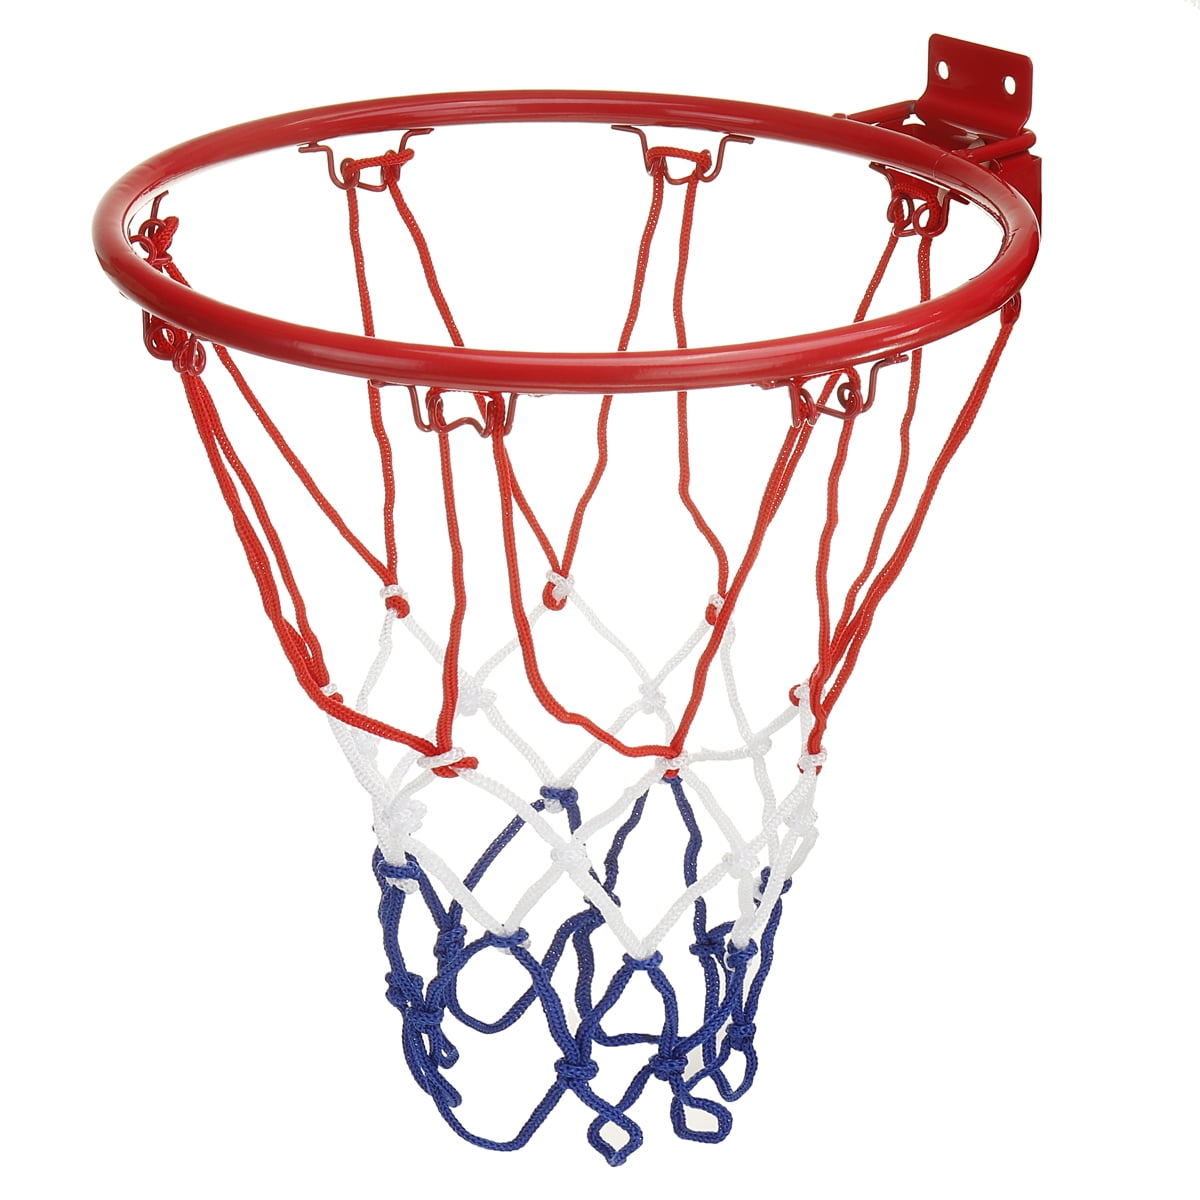 18" Basketball Ring Hoop Net Full Size Wall Mounted Outdoor Indoor Hanging 